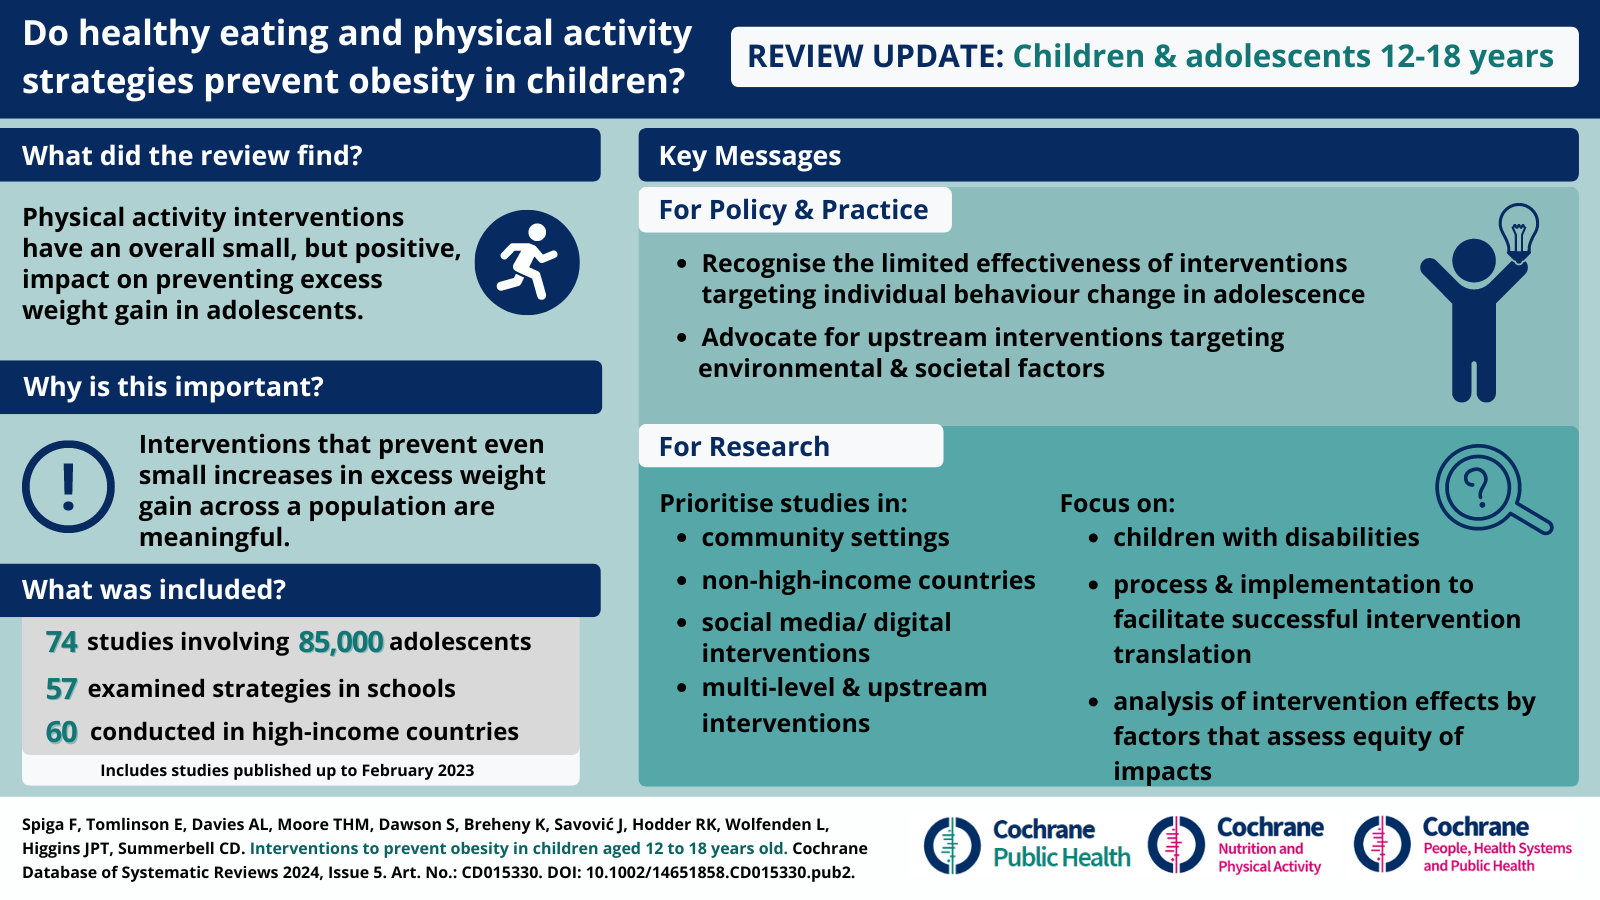 An infographic summarising the Cochrane Review